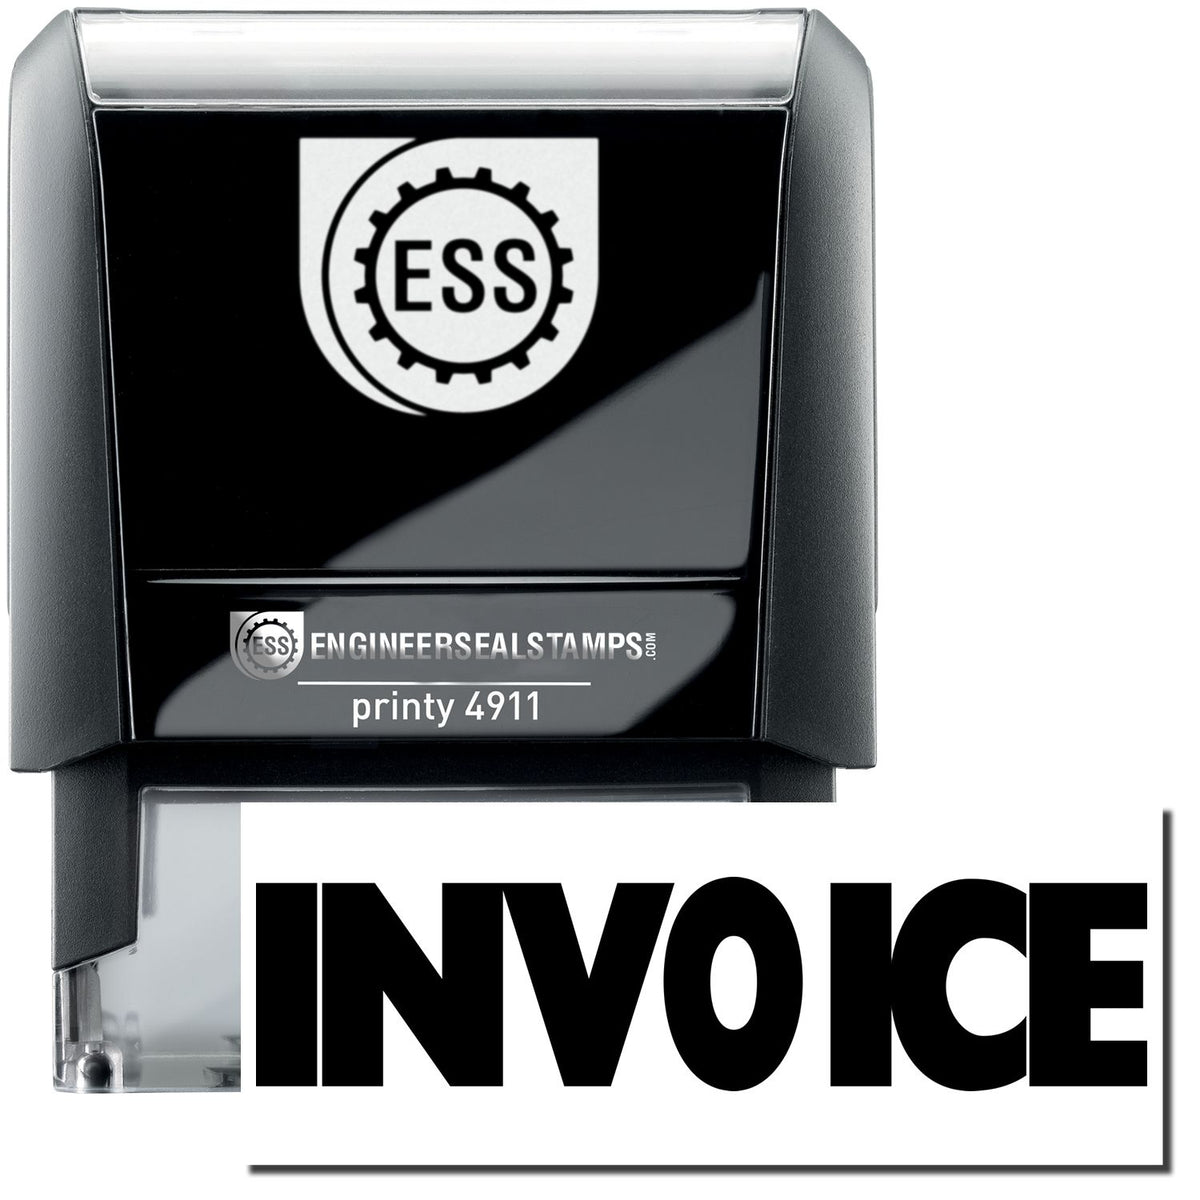 A self-inking stamp with a stamped image showing how the text &quot;INVOICE&quot; is displayed after stamping.